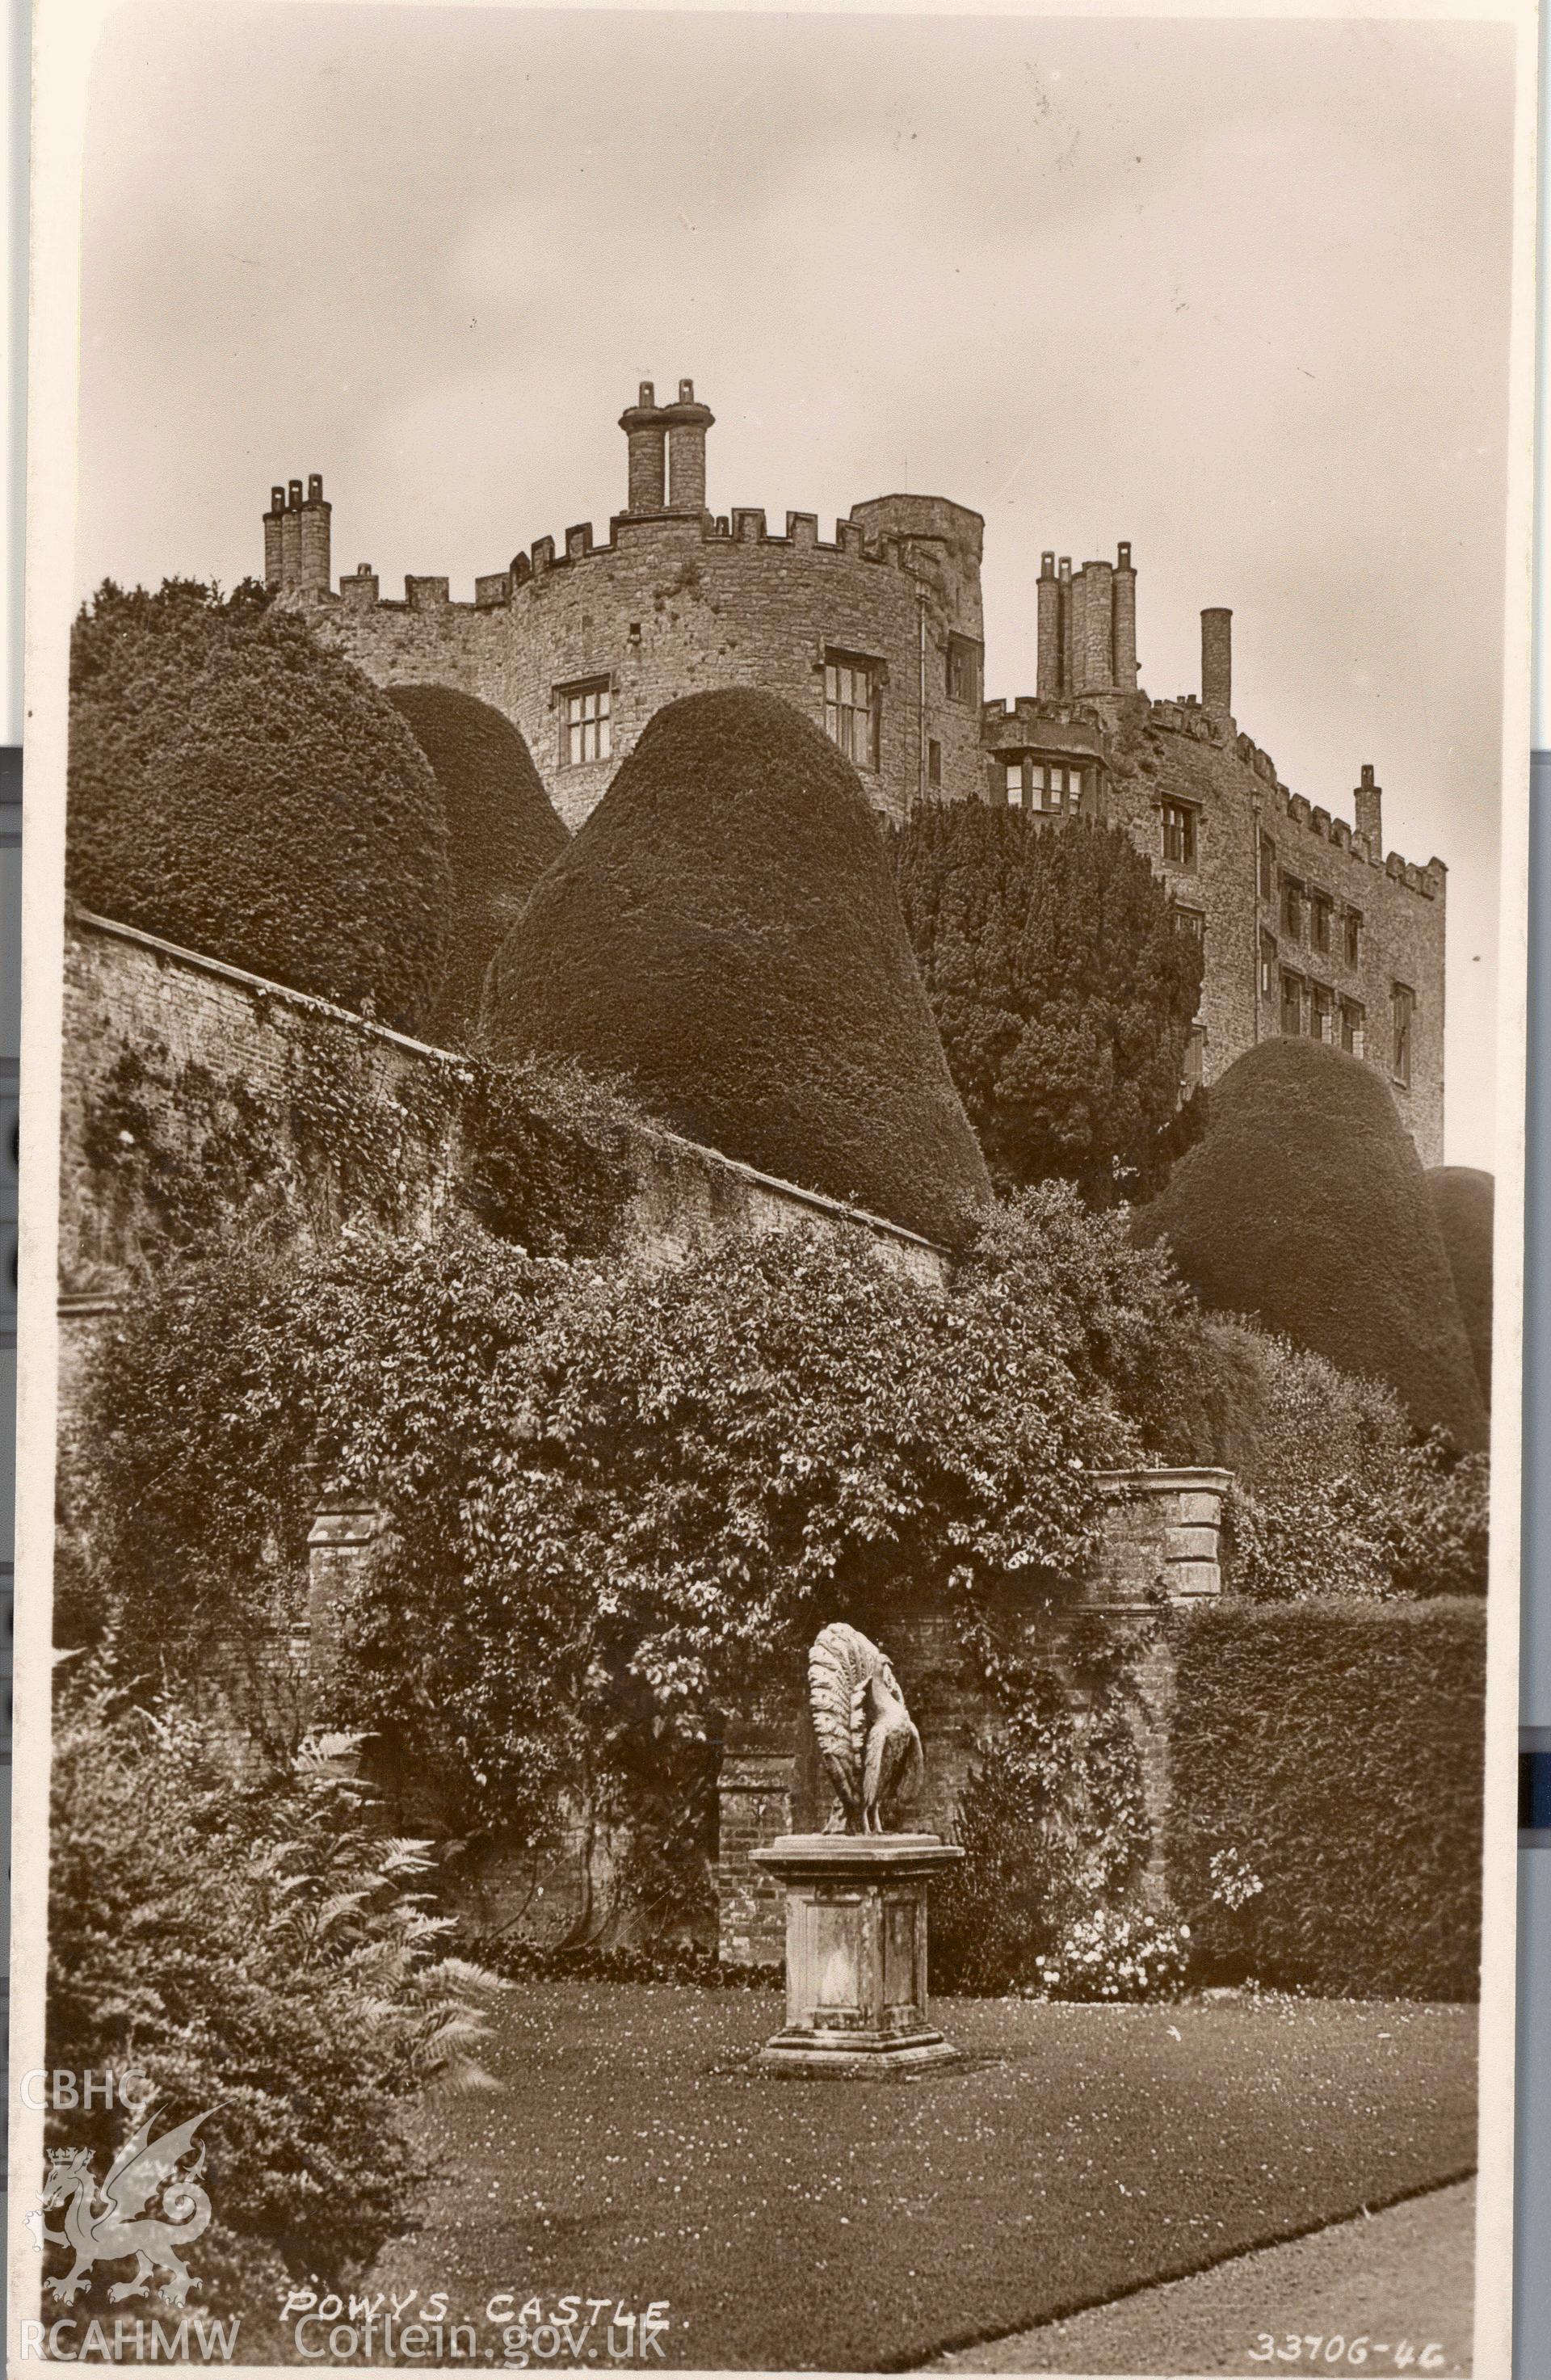 Digitised postcard image of Powis Castle showing terraces and peacock statue. Produced by Parks and Gardens Data Services, from an original item in the Peter Davis Collection at Parks and Gardens UK. We hold only web-resolution images of this collection, suitable for viewing on screen and for research purposes only. We do not hold the original images, or publication quality scans.